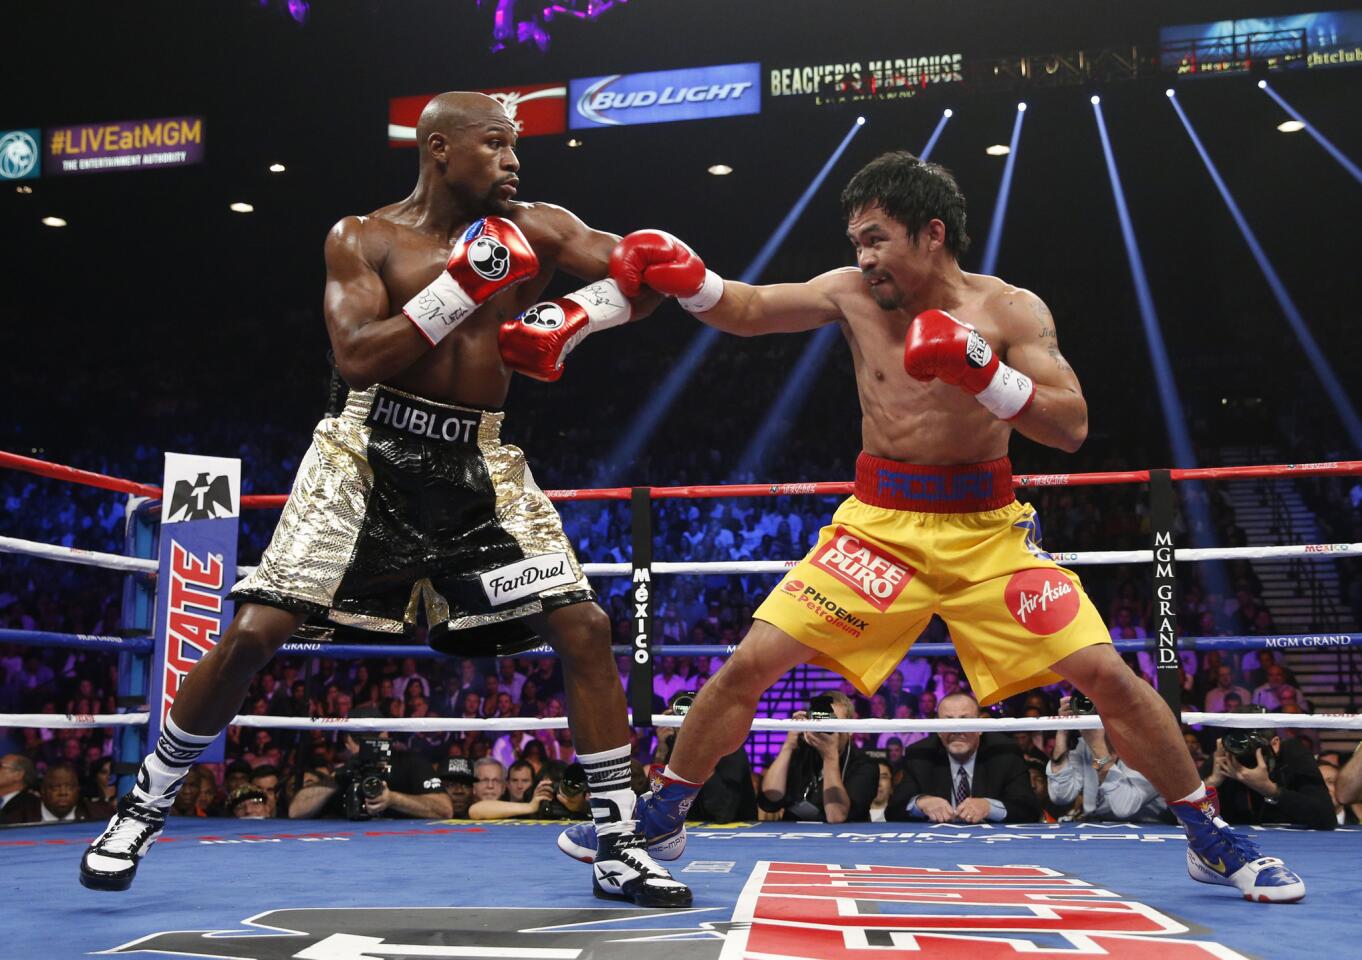 Floyd Mayweather Jr. and Manny Pacquiao trade blows.